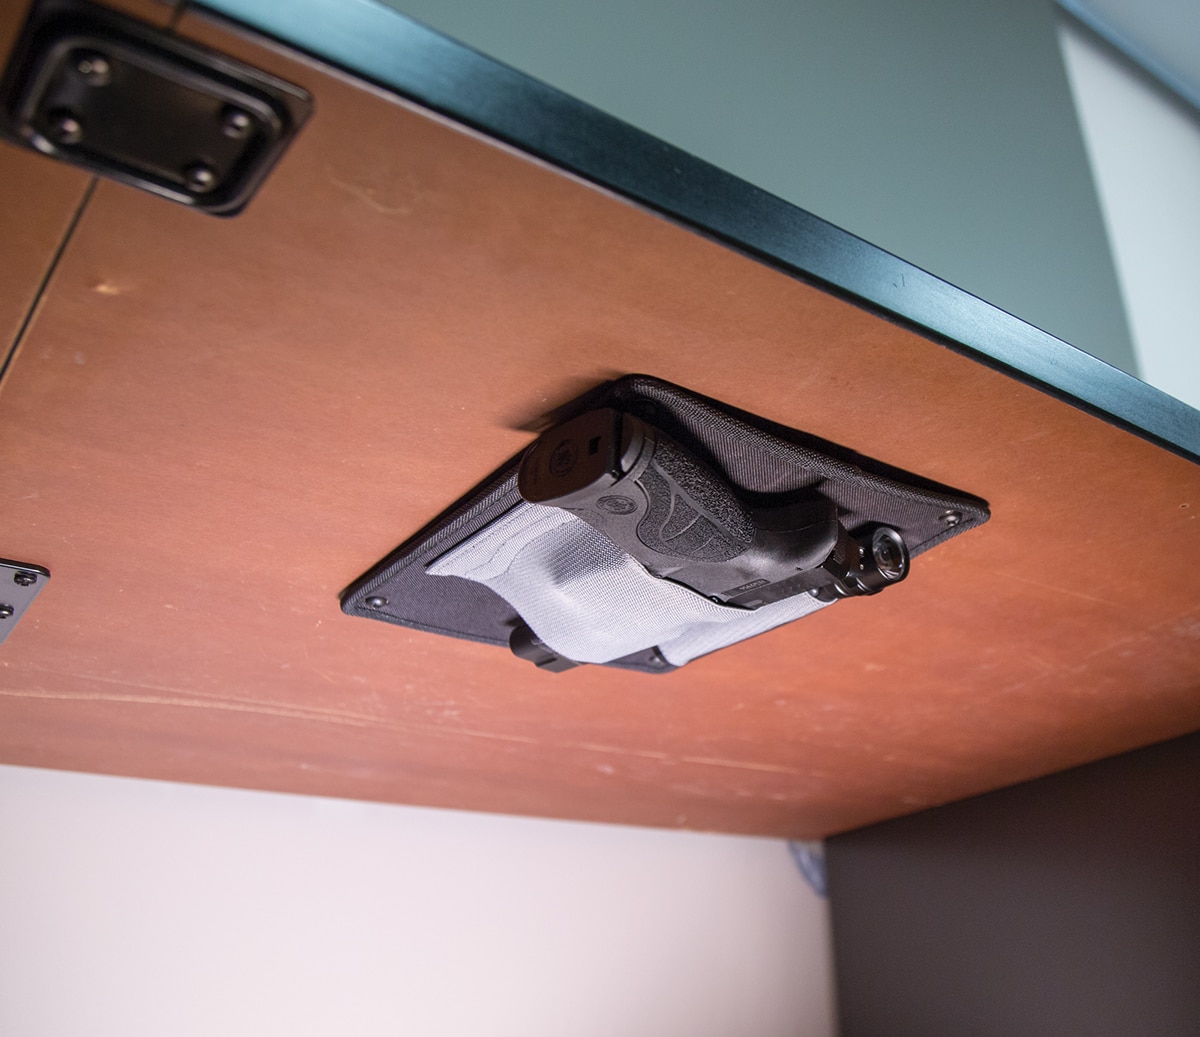 The Under Desk holster offers concealed storage of a firearm and two accessories. (Photo: Lockdown Vault Accessories)